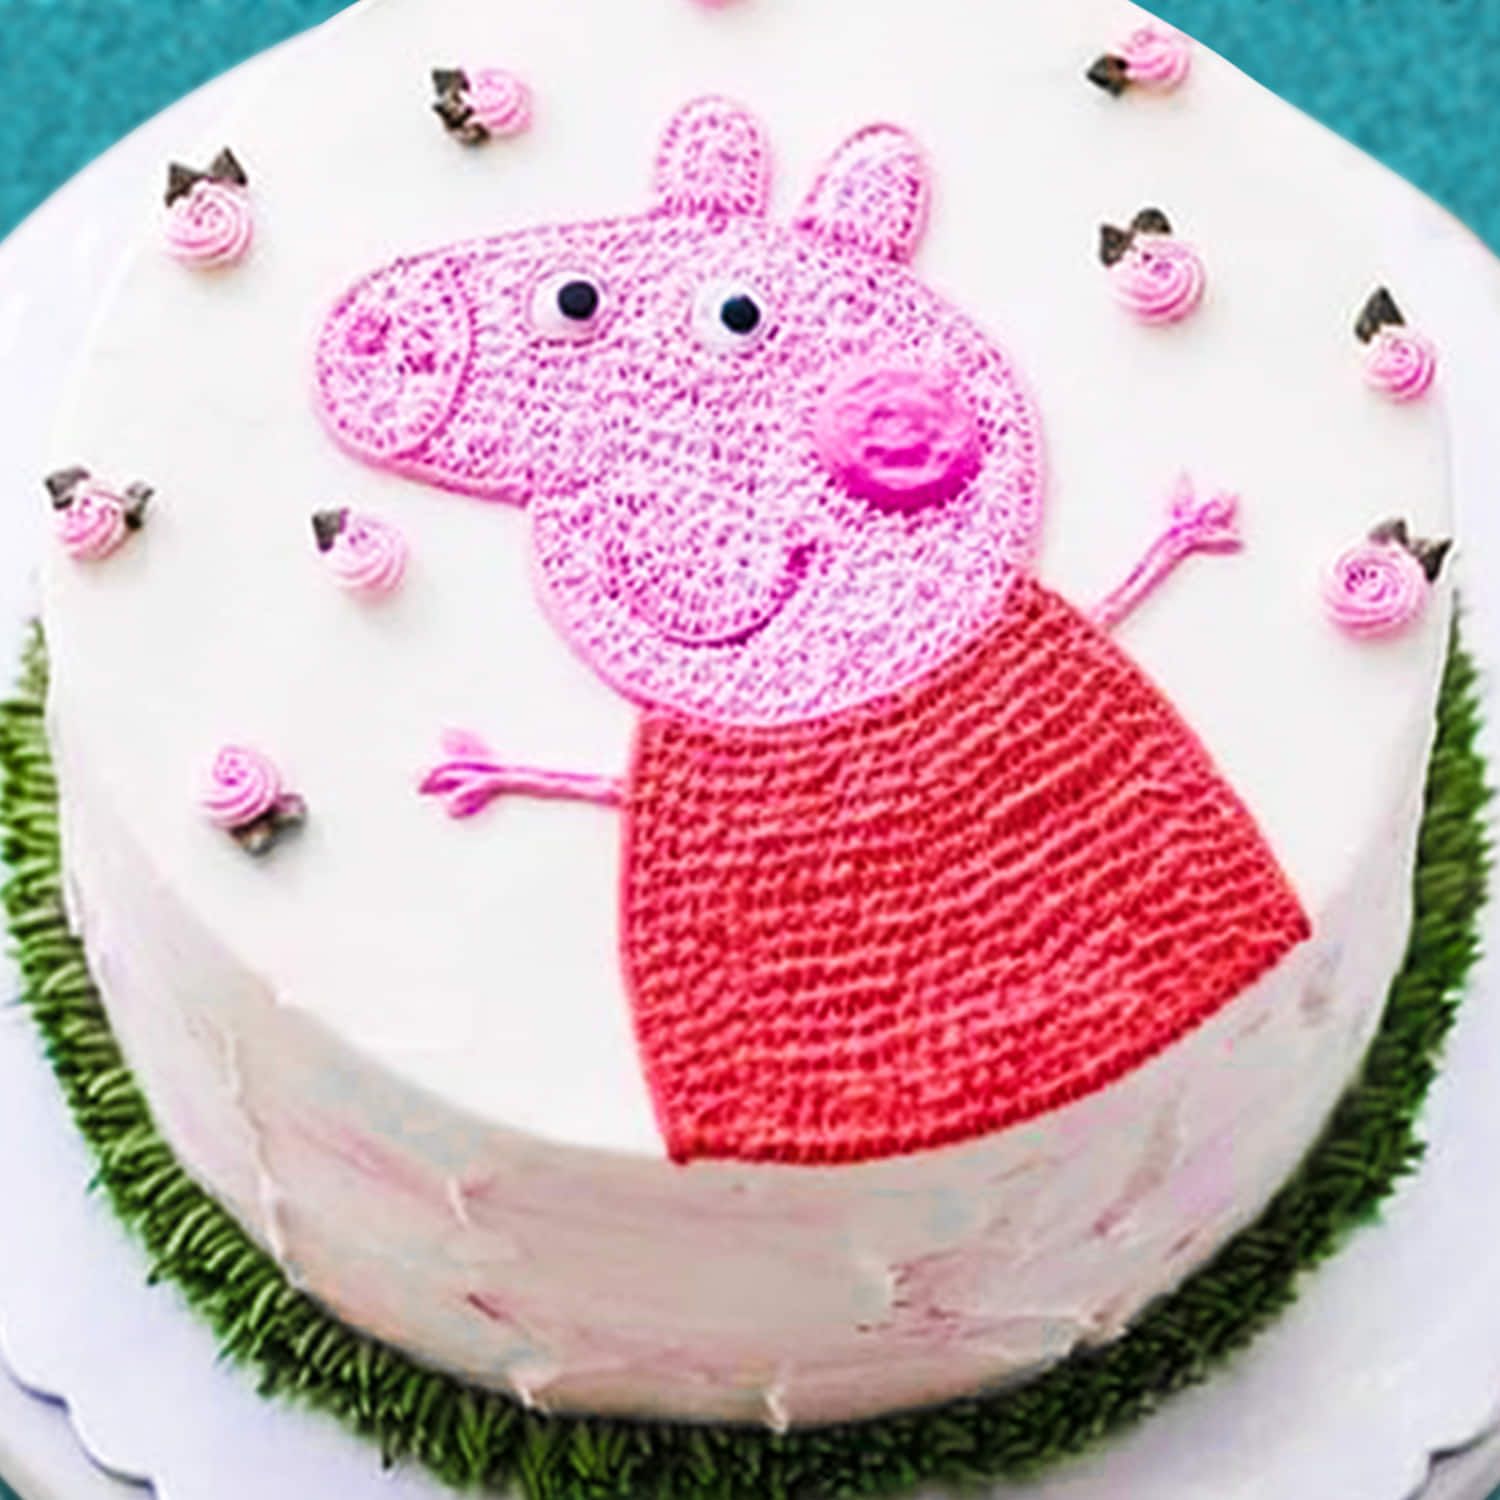 3d Rendered Illustration Of Pig Cartoon Character With Cake Stock Photo,  Picture and Royalty Free Image. Image 53247368.